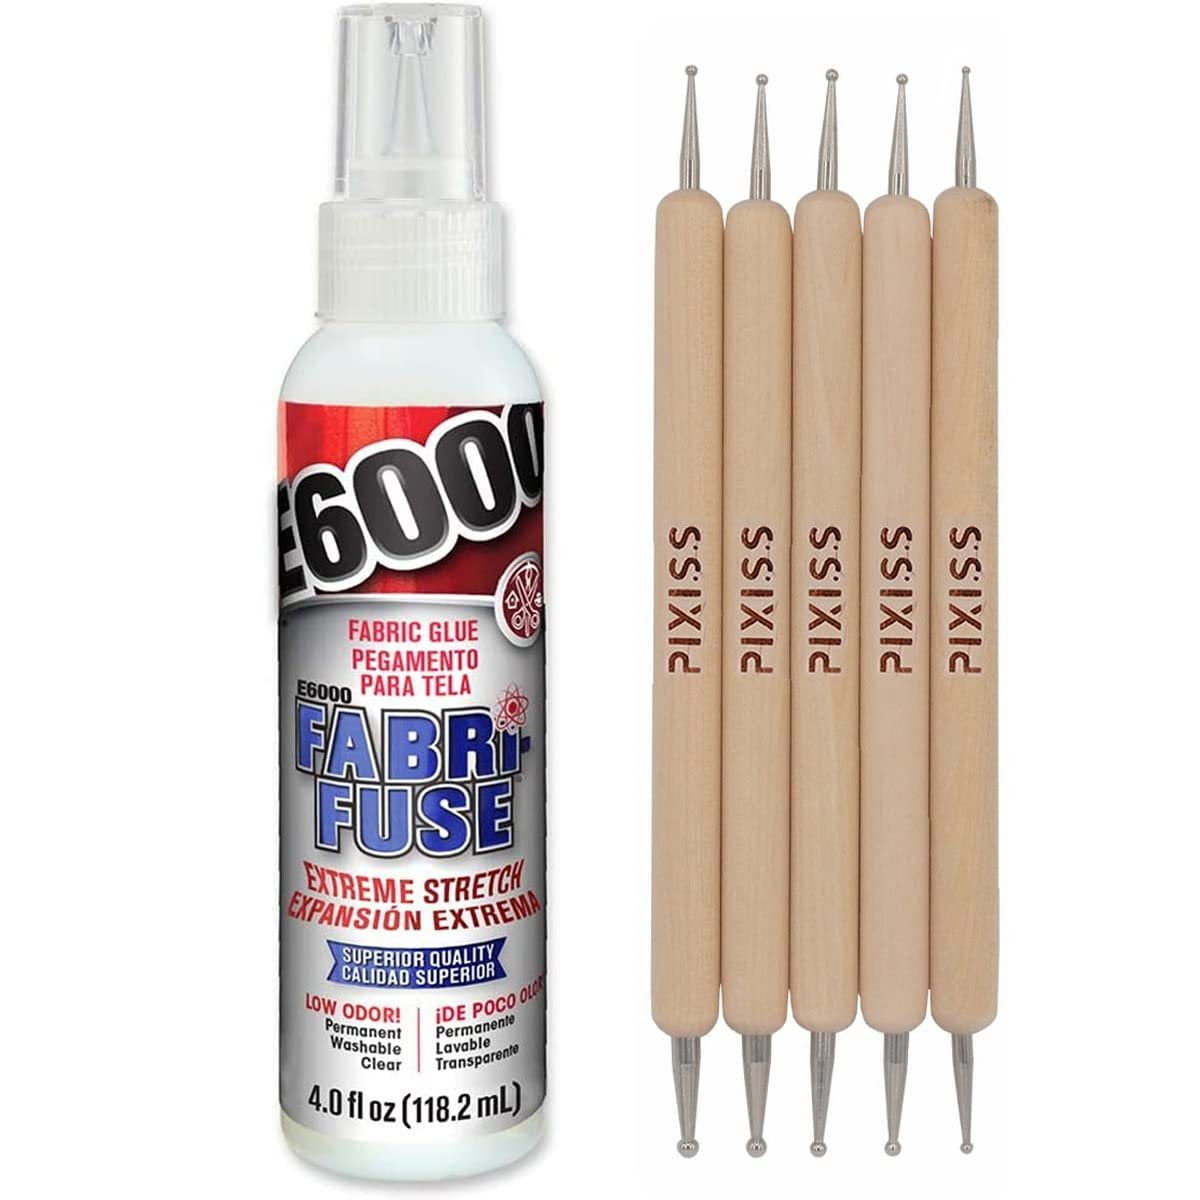 Leather Glue Adhesive - Aleenes Leather Fabric Glue for Patches, Upholstery, Tears, Canvas, Clothing, Leather Punch Pen Tool with 6 Replacement Tips